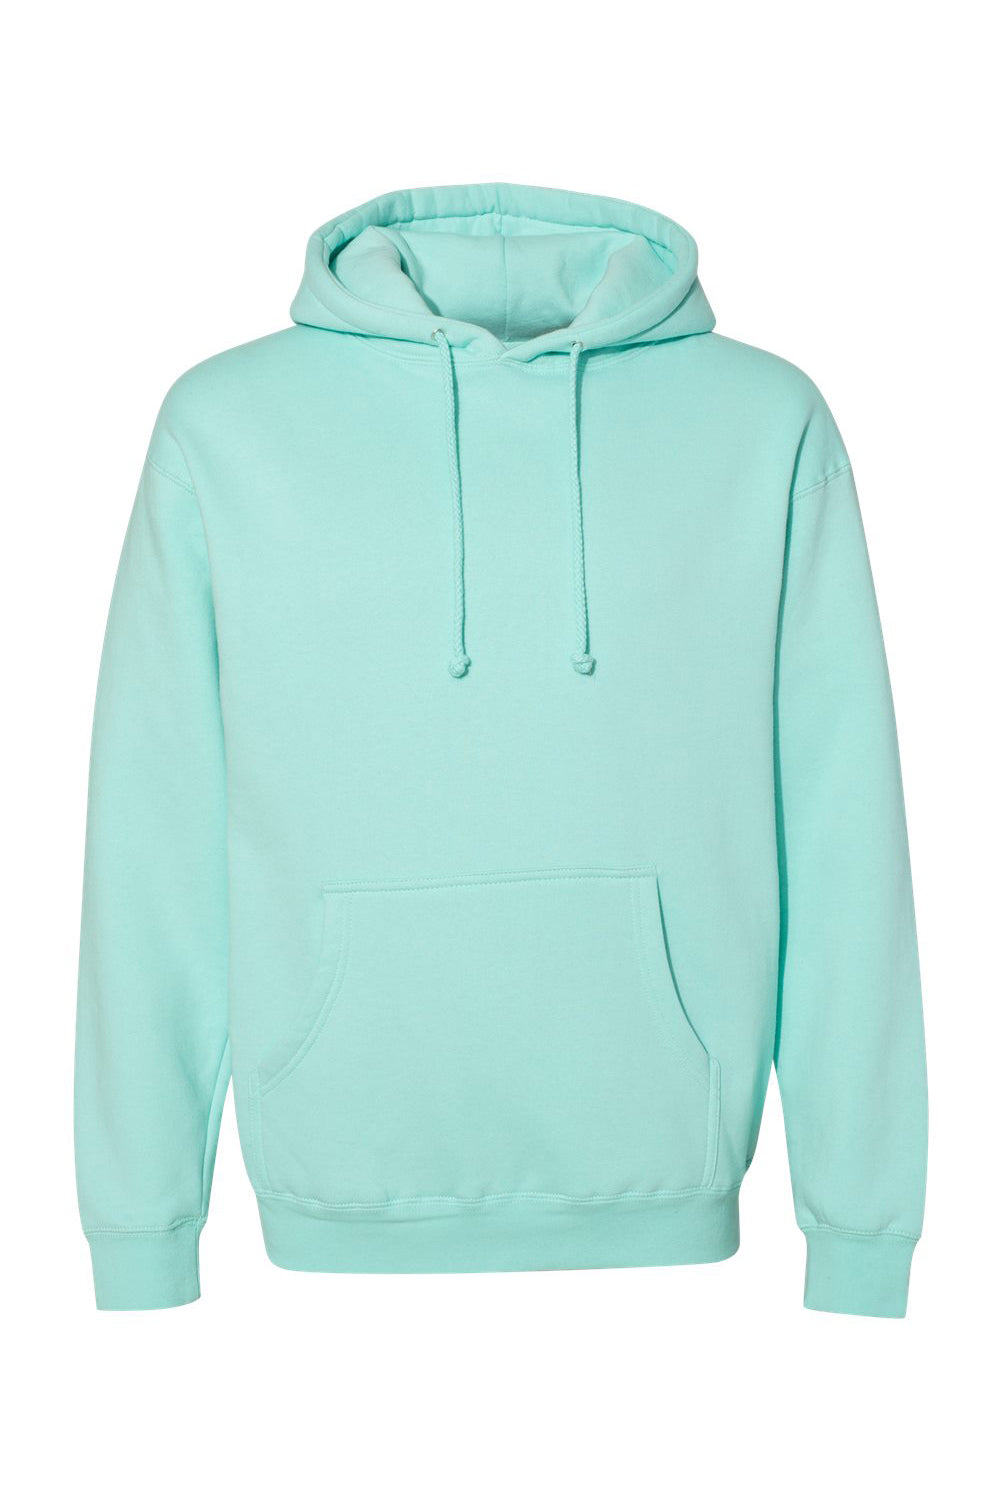 Independent Trading Co. IND4000 Mens Hooded Sweatshirt Hoodie Mint Green Flat Front